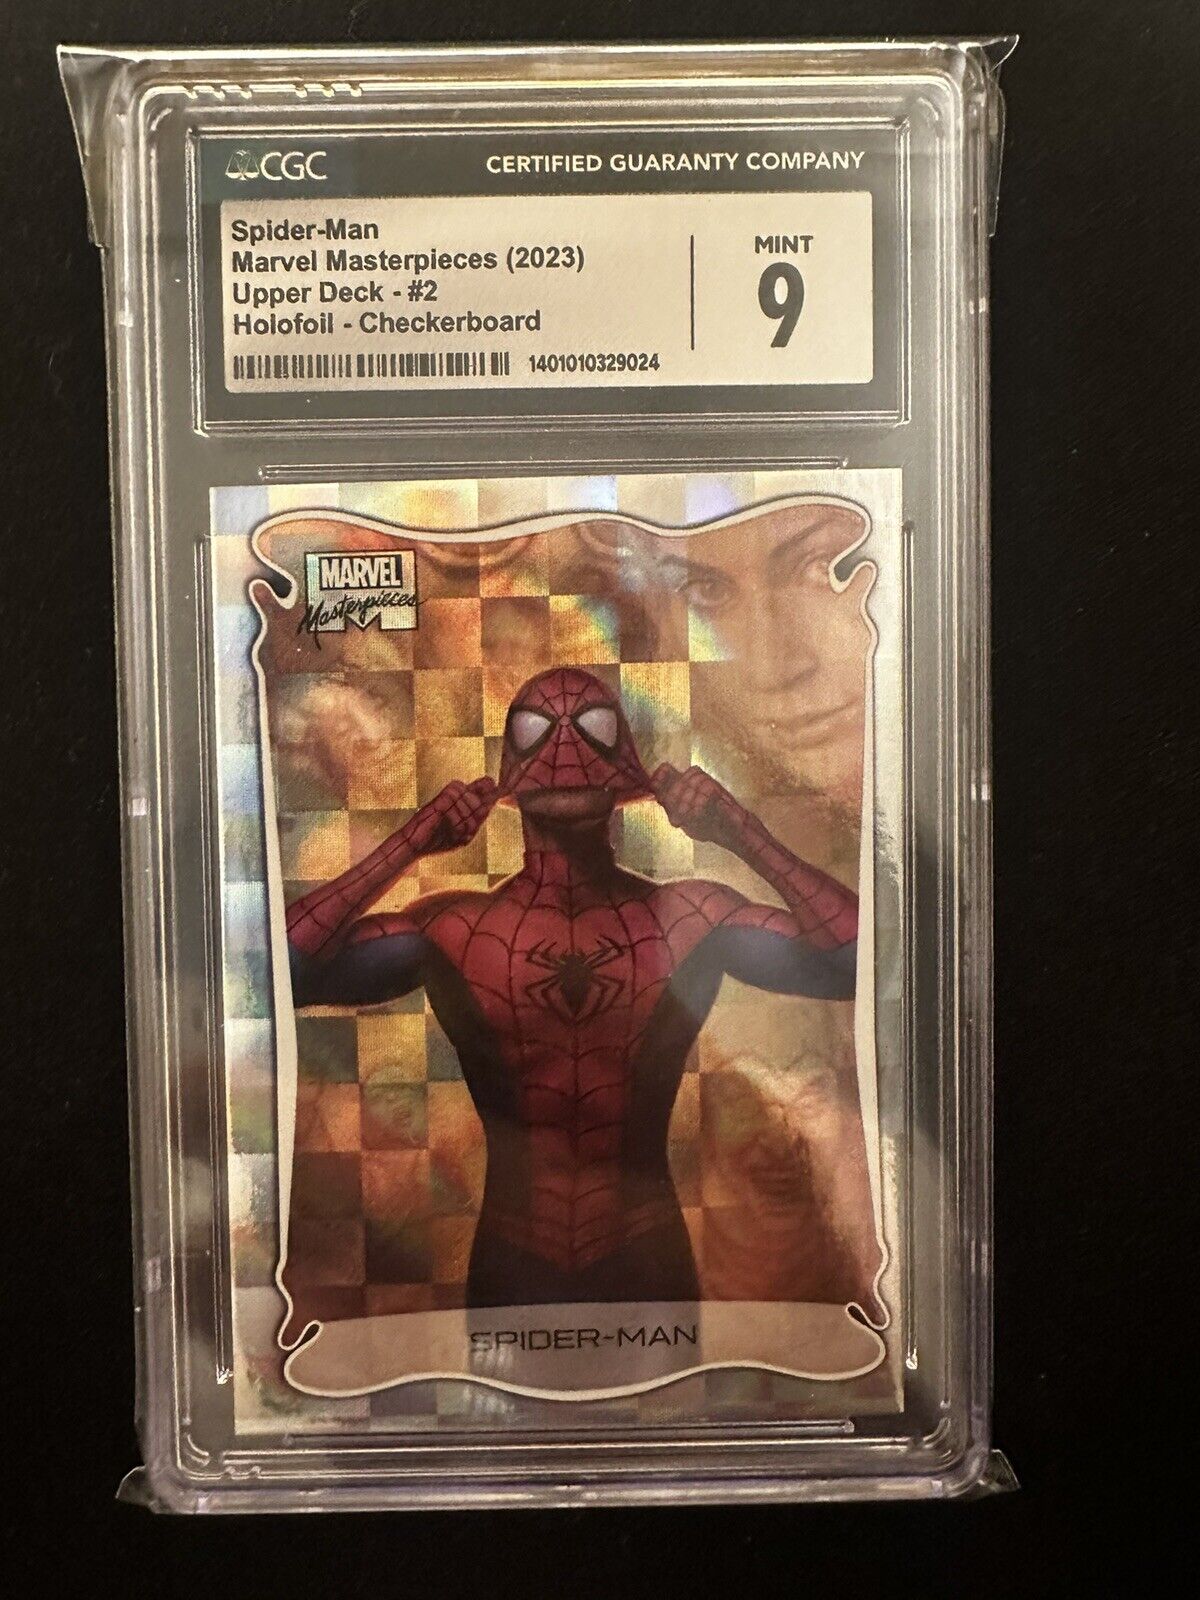 SPIDER-MAN 2023 UD Marvel Masterpieces Holofoil Checkerboard #2 CGC MINT 9 POP 1